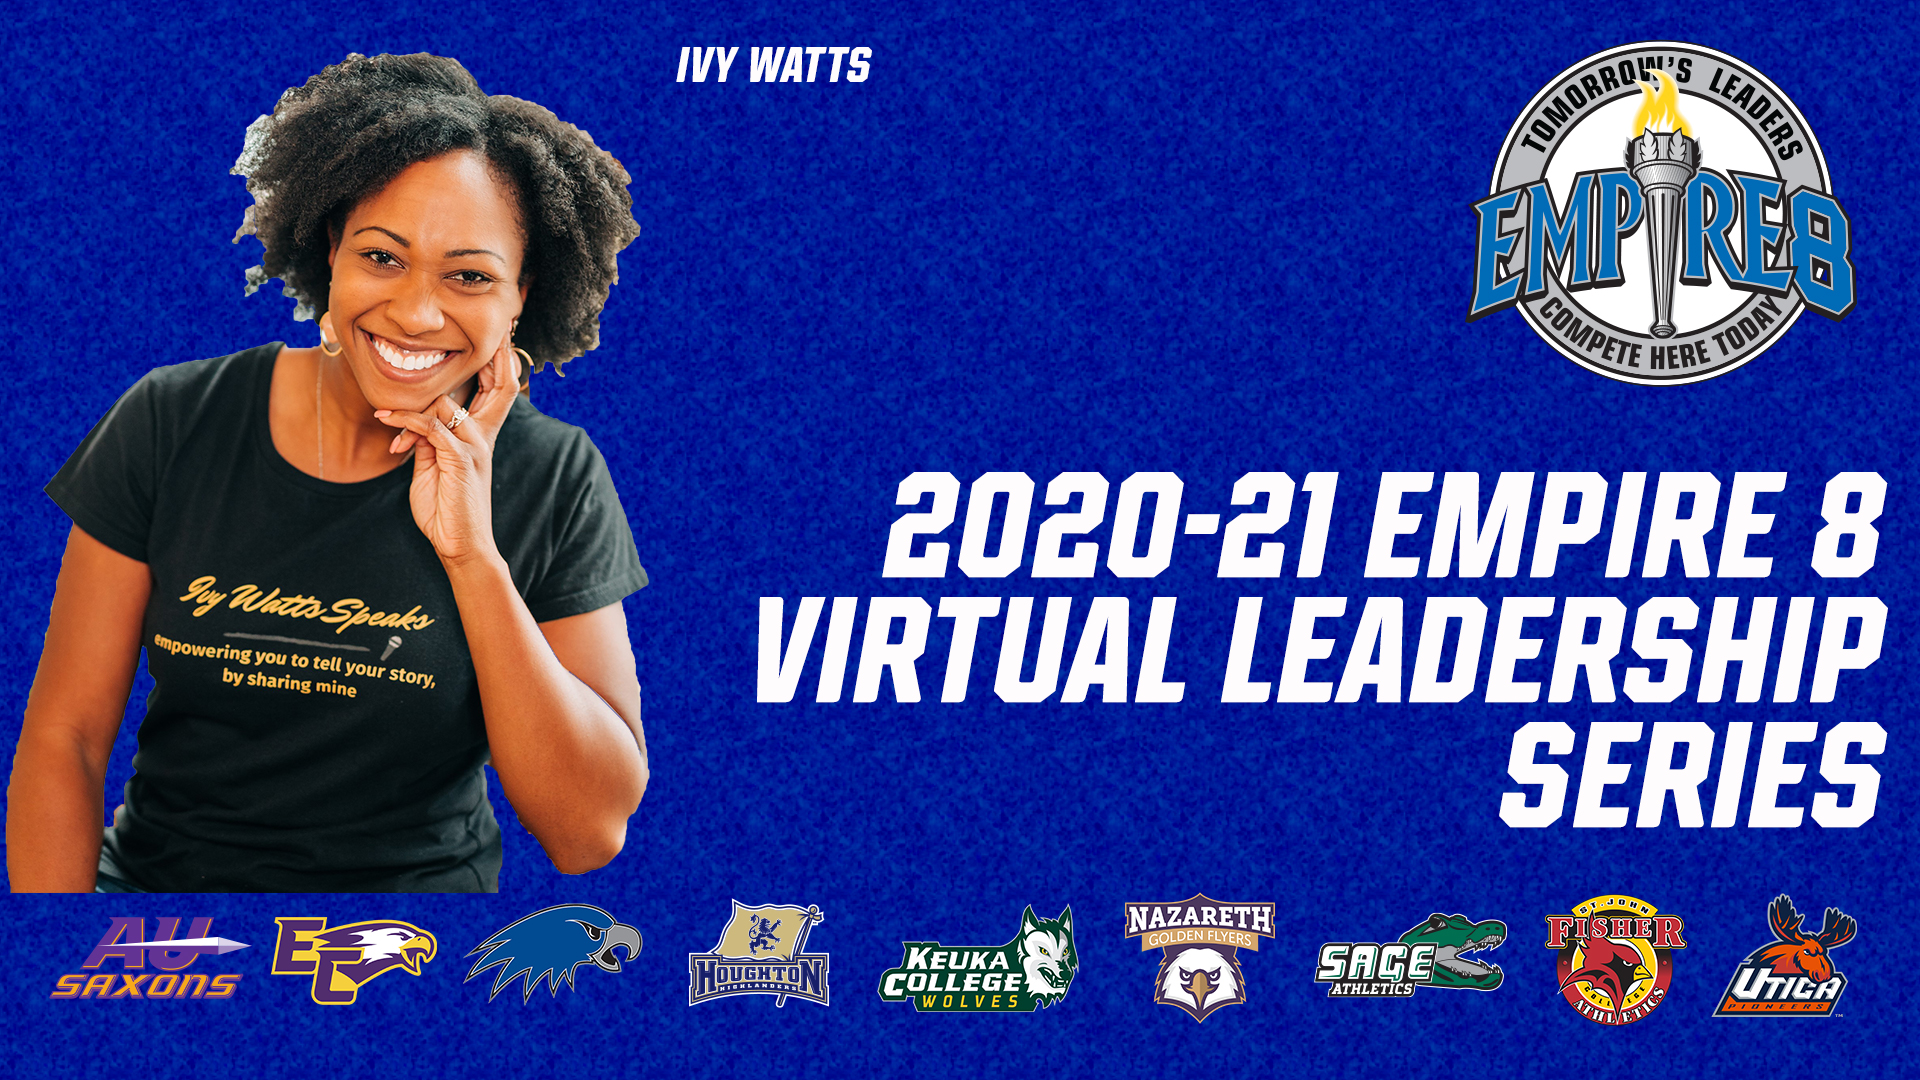 Sage student-athletes to participate in Empire 8 Virtual Student-Athlete Leadership Series